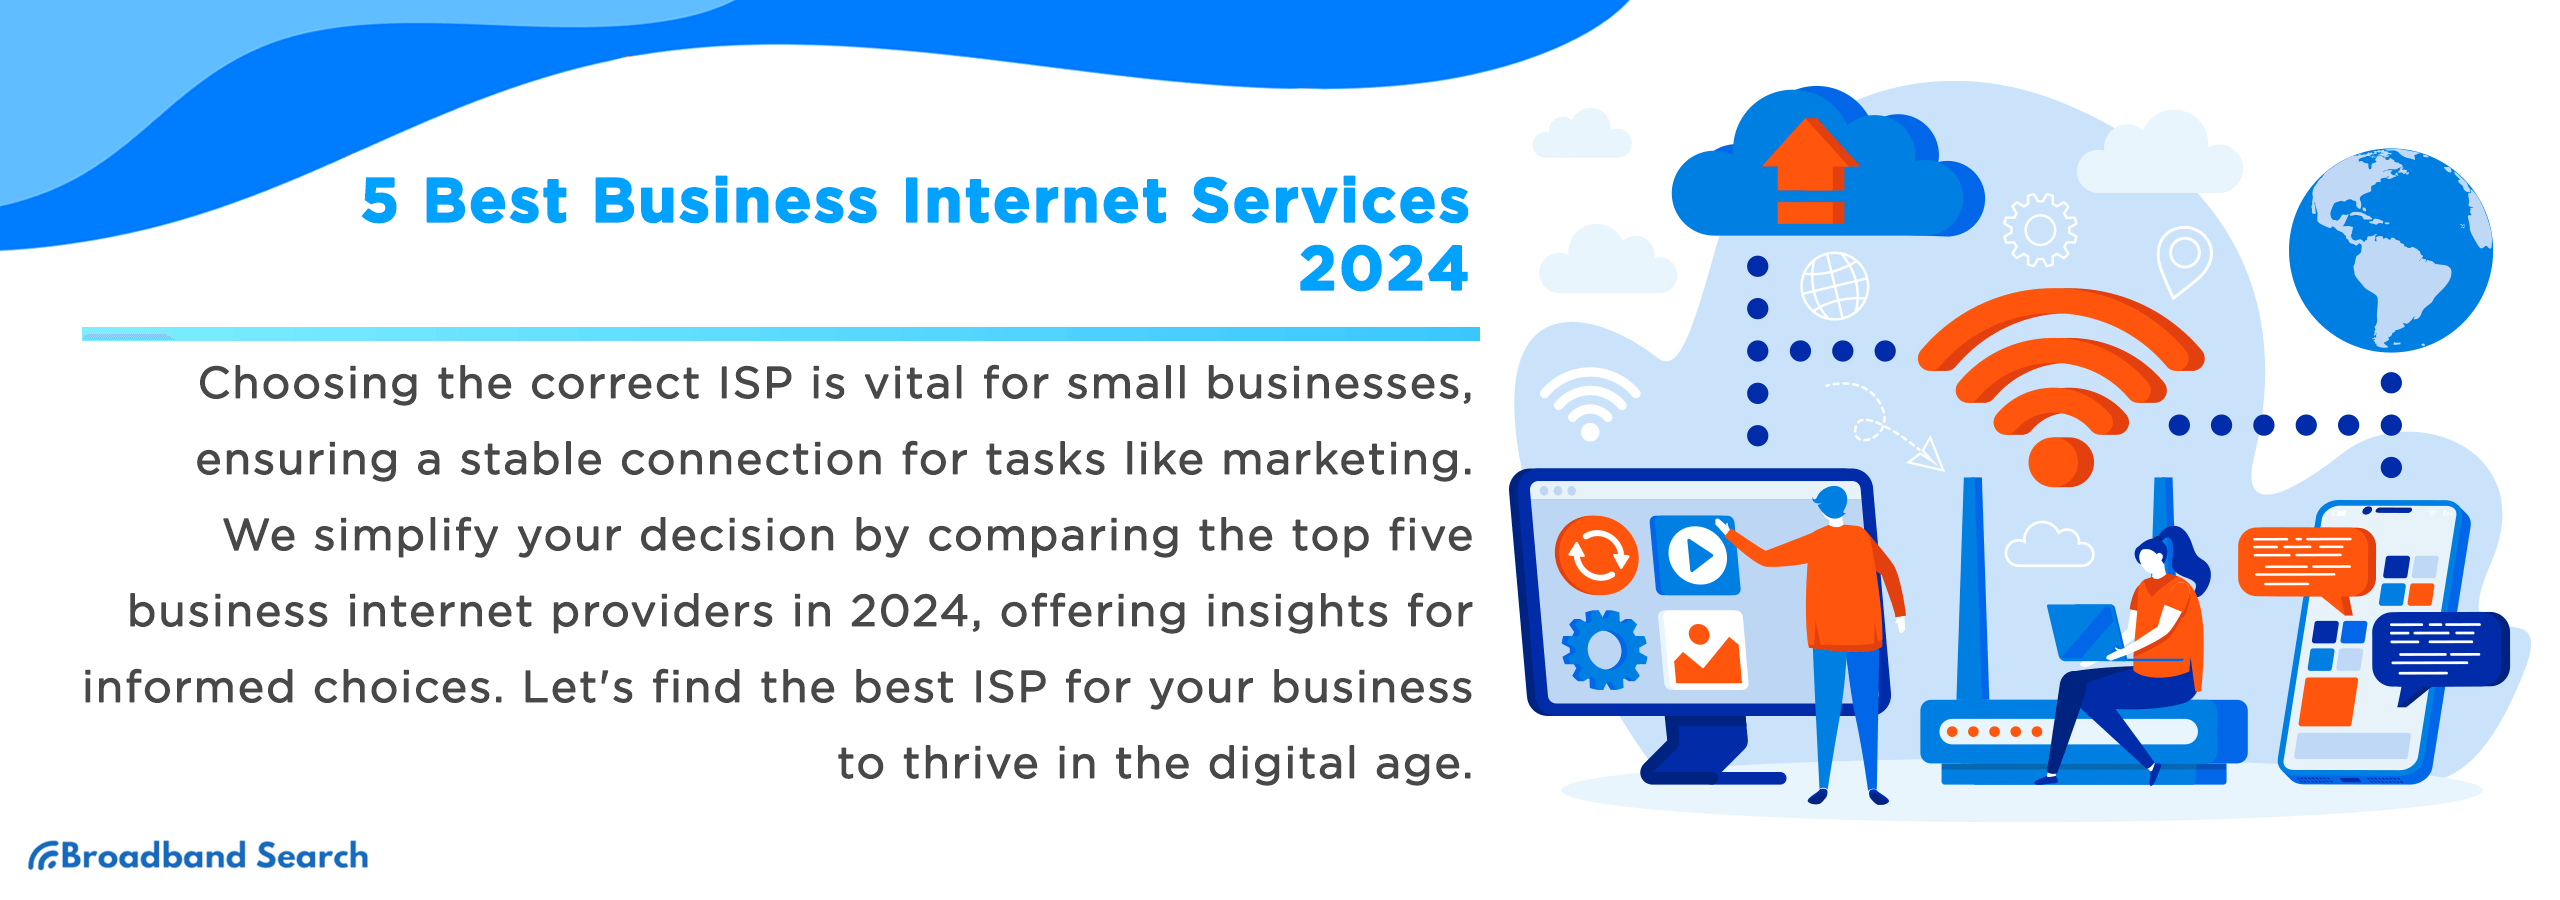 The 5 Best Business Internet Services for 2024